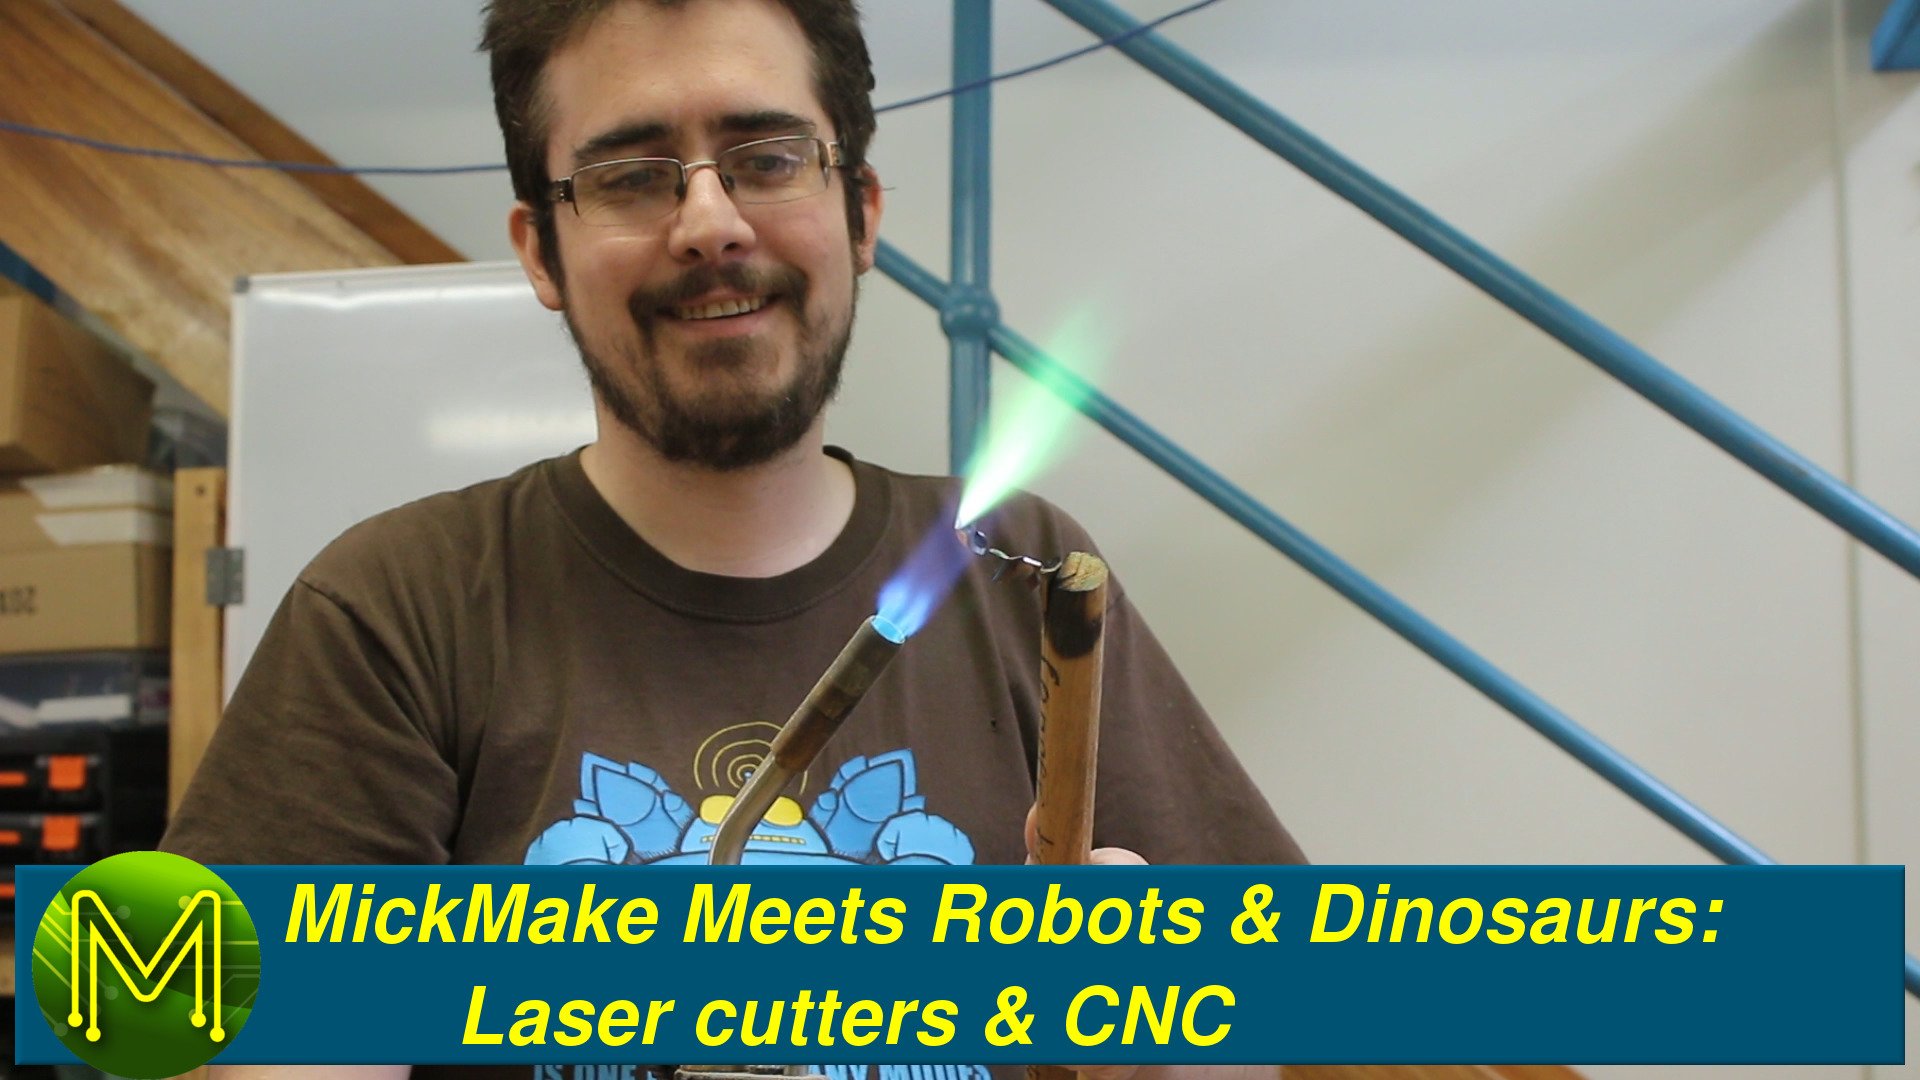 MickMake Meets Robots and Dinosaurs - Part 1: Laser cutters, CNC and other machinery